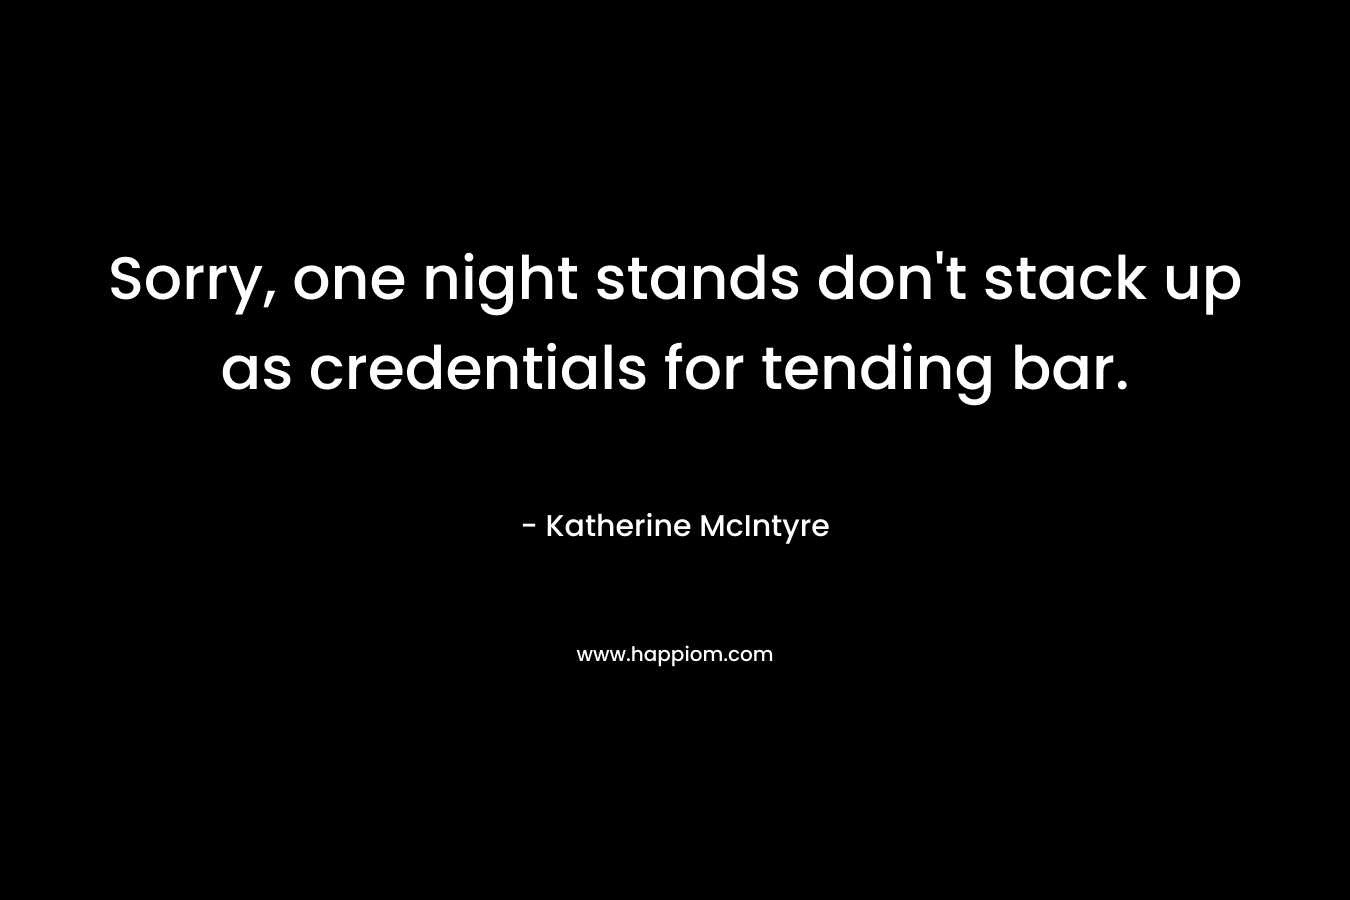 Sorry, one night stands don’t stack up as credentials for tending bar. – Katherine McIntyre